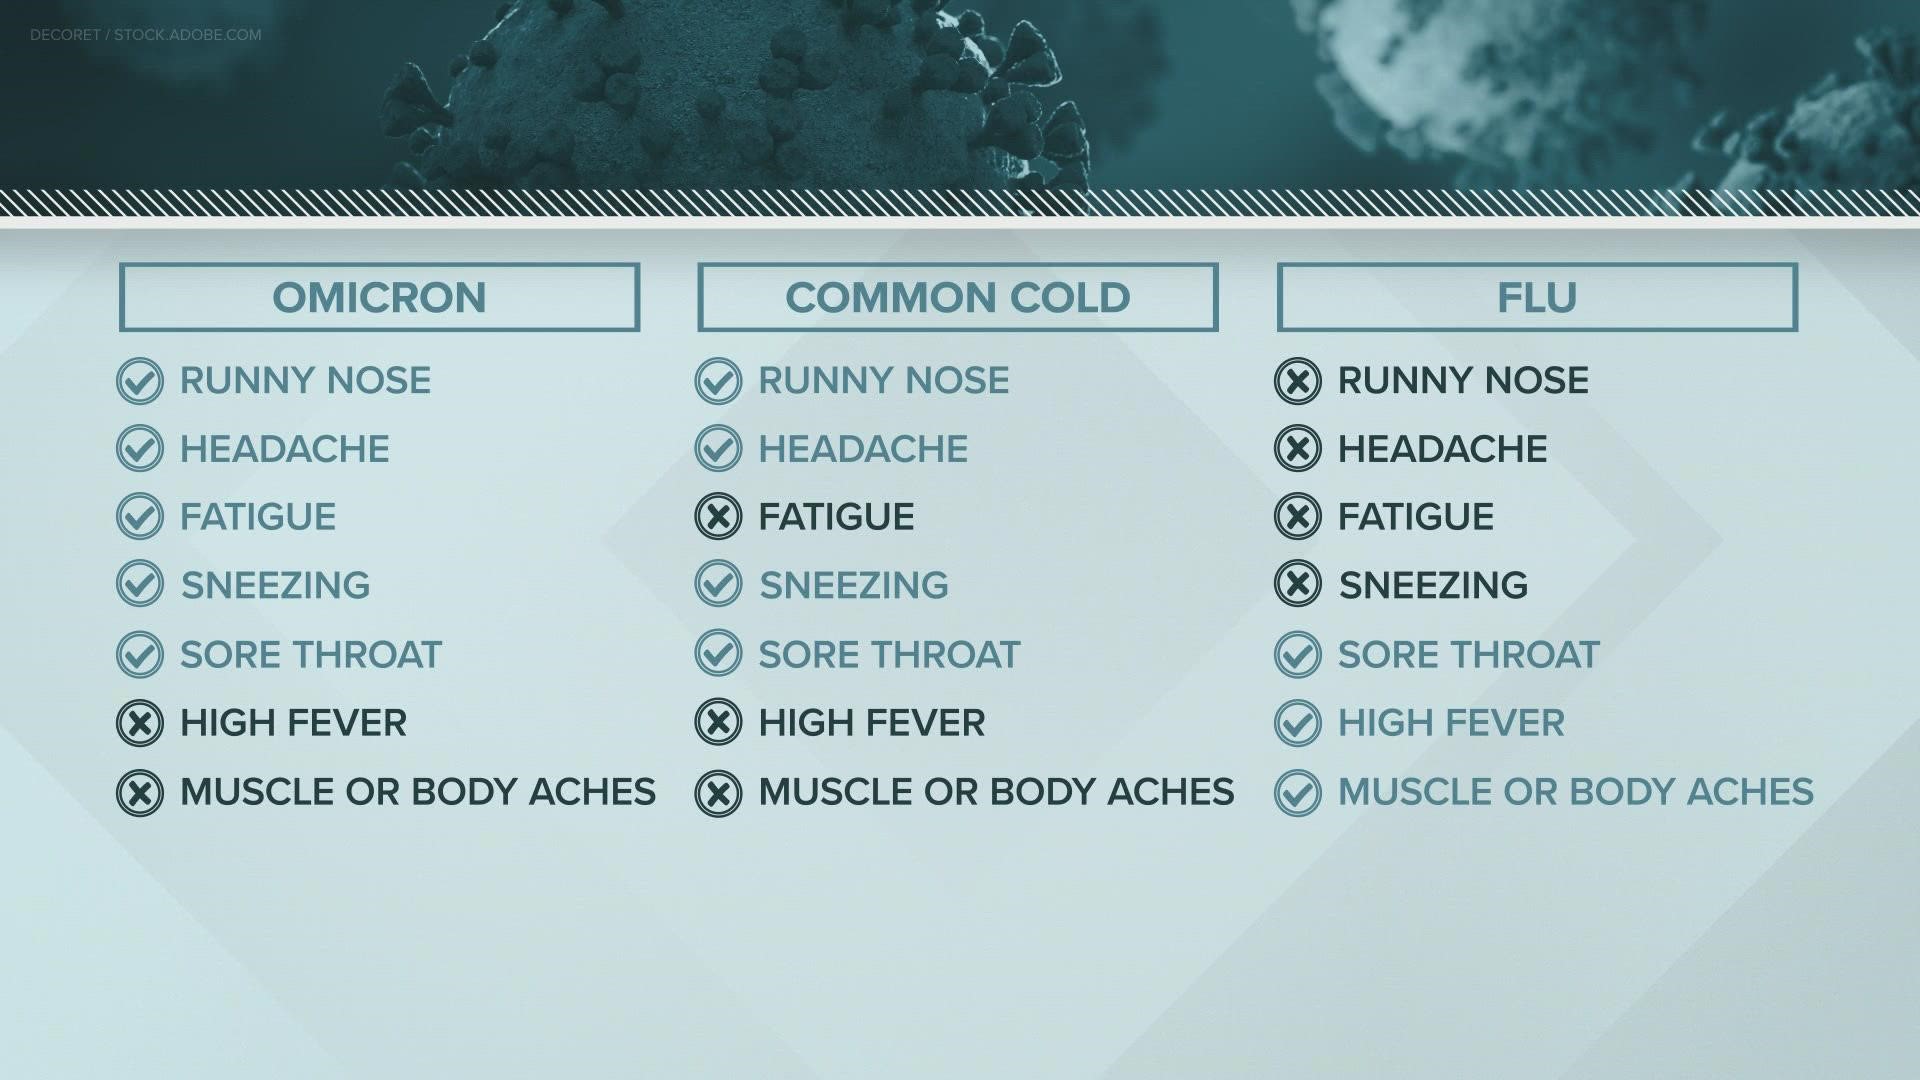 If you're starting to feel under the weather, it might be hard to tell what you have during cold and flu season.